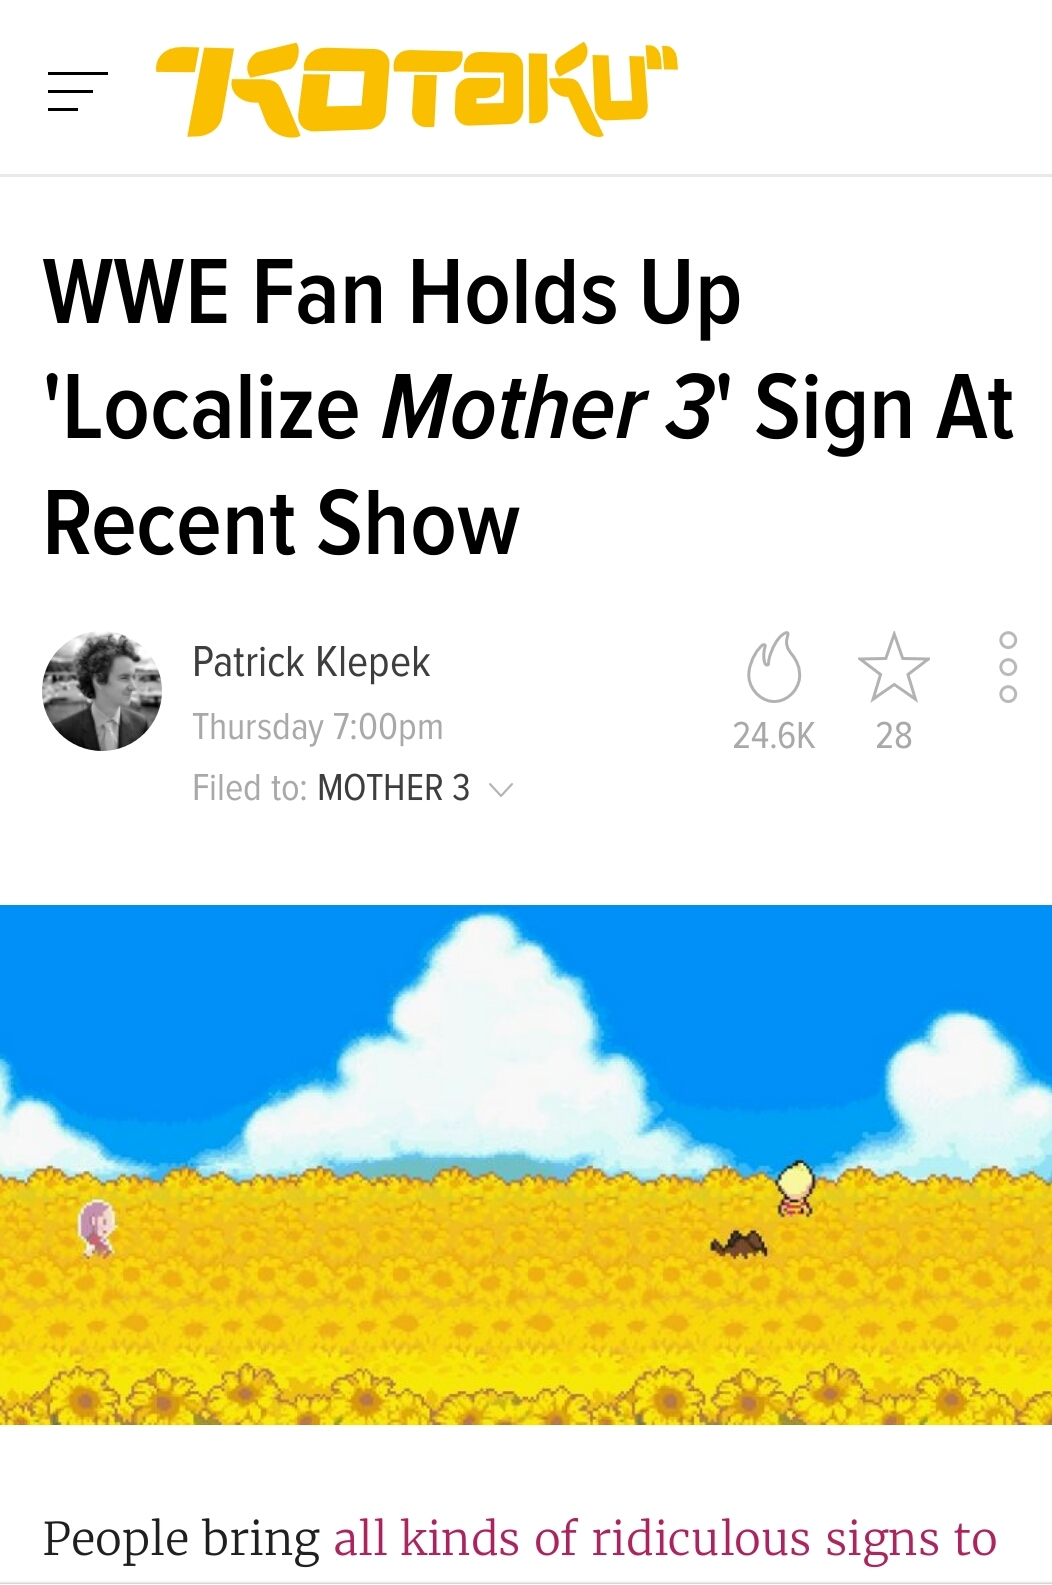 Sign of the Times – Localize Mother 3, WWE, and the Unbearable Lightness of Being an Internet Meme